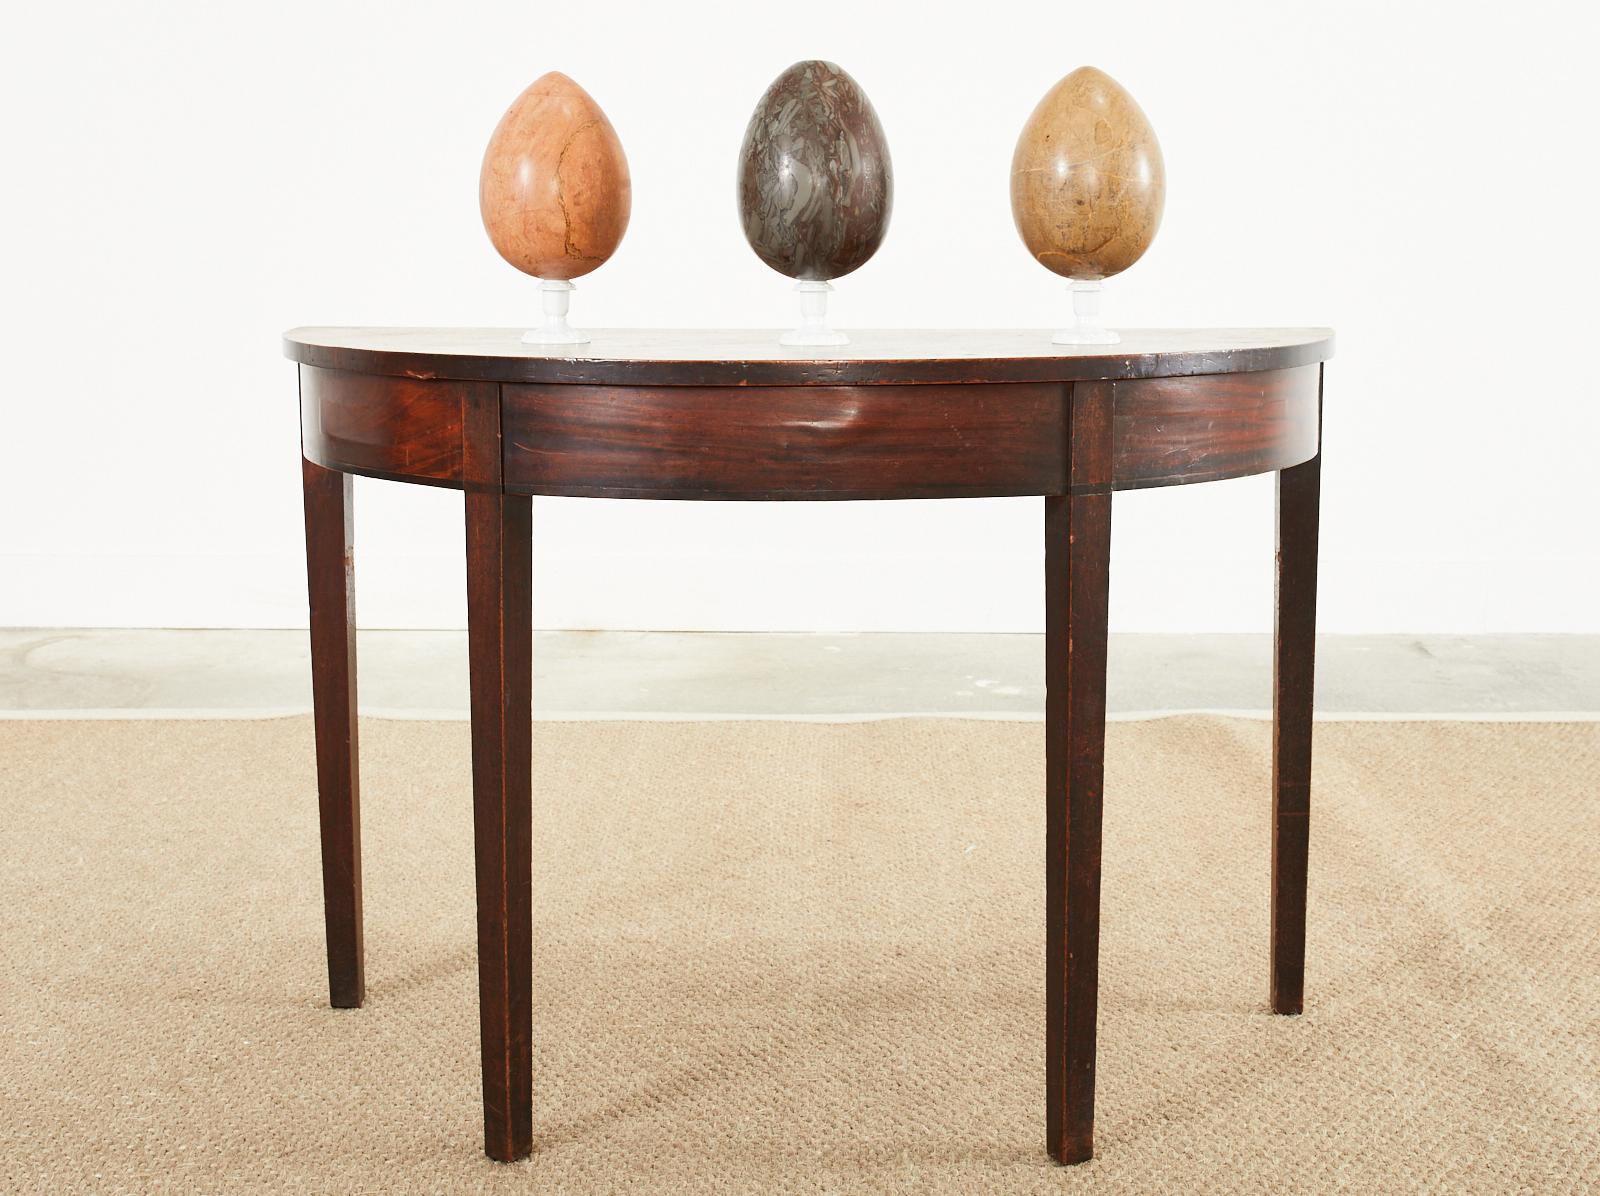 Unique set of three large Italian polished marble egg specimens from Italy. Beautifully hand-formed and each having a slightly different color. The exquisite polishing showcases the interesting marble veins. Price is for the set of three. We have